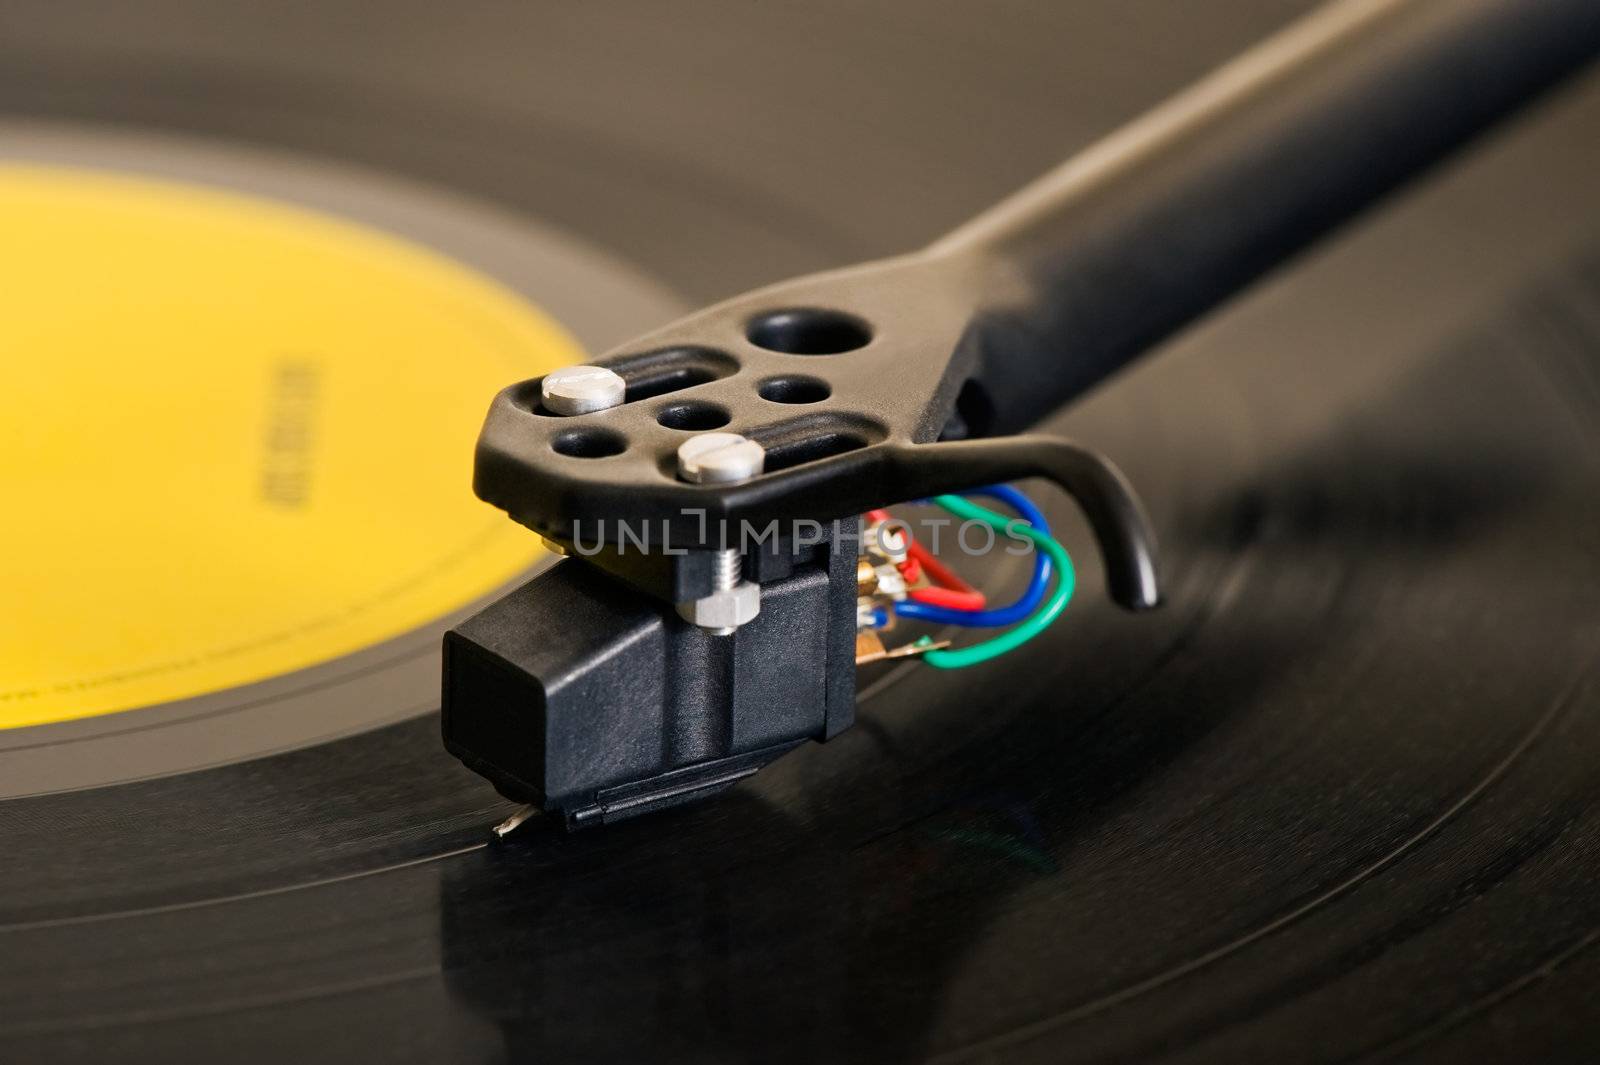 Close-up image of a turntable showing details of the cartridge and tonearm